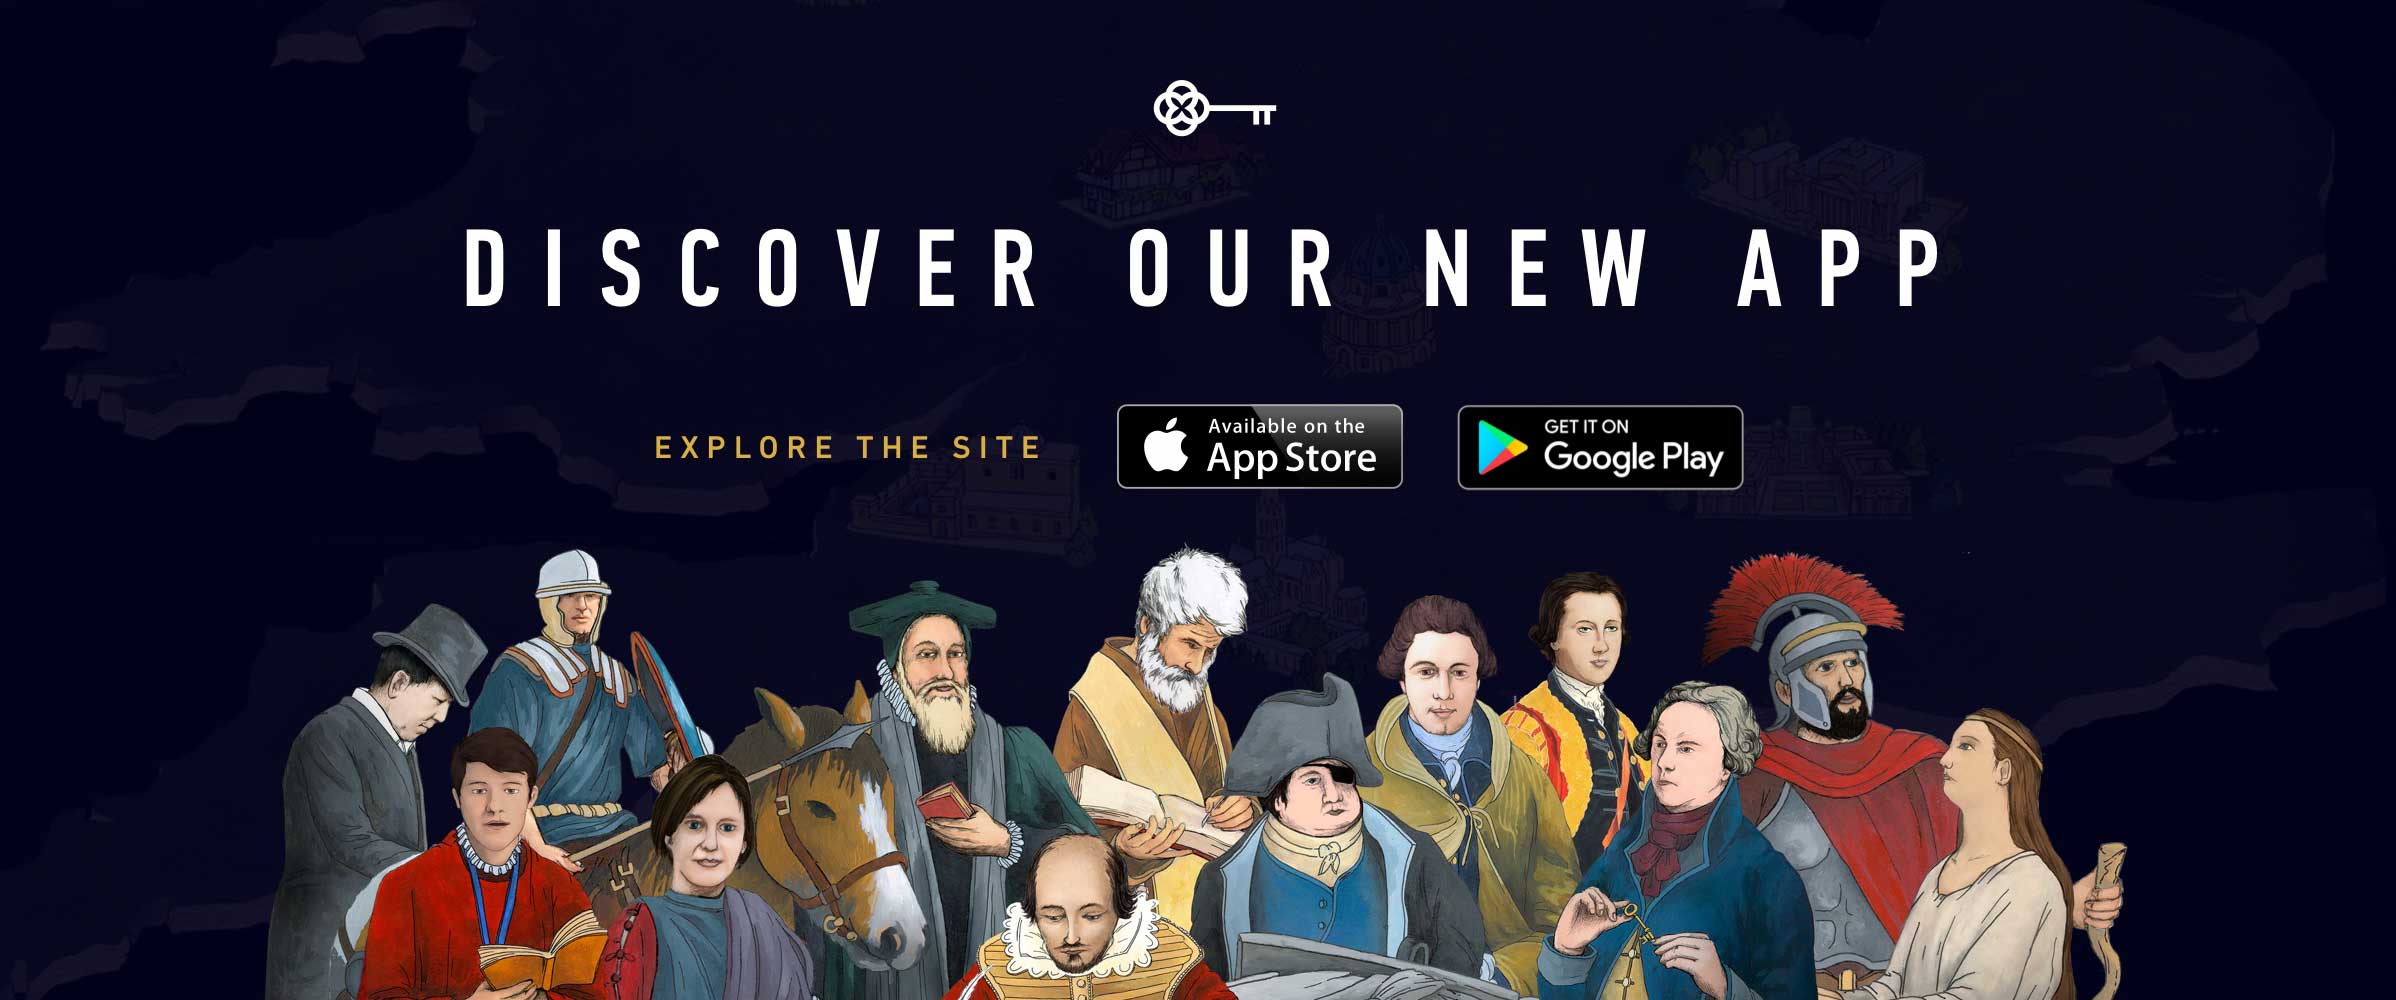 Discover our new app